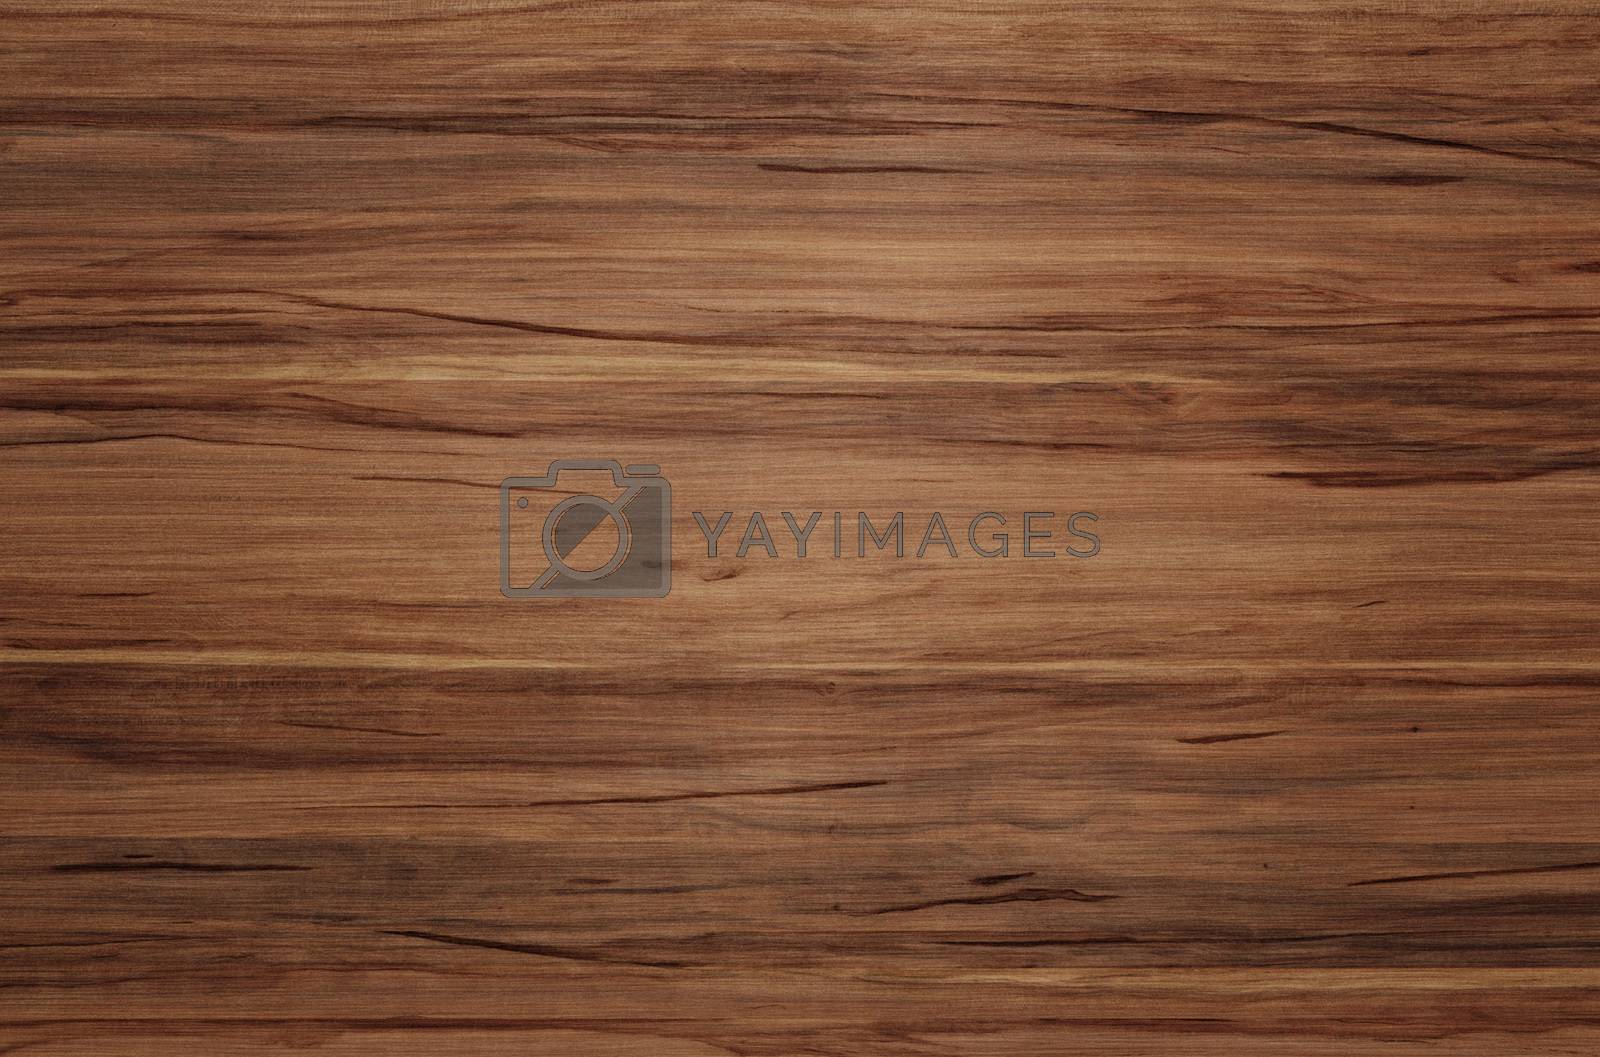 Royalty free image of Brown grunge wooden texture to use as background. Wood texture with natural pattern by ivo_13